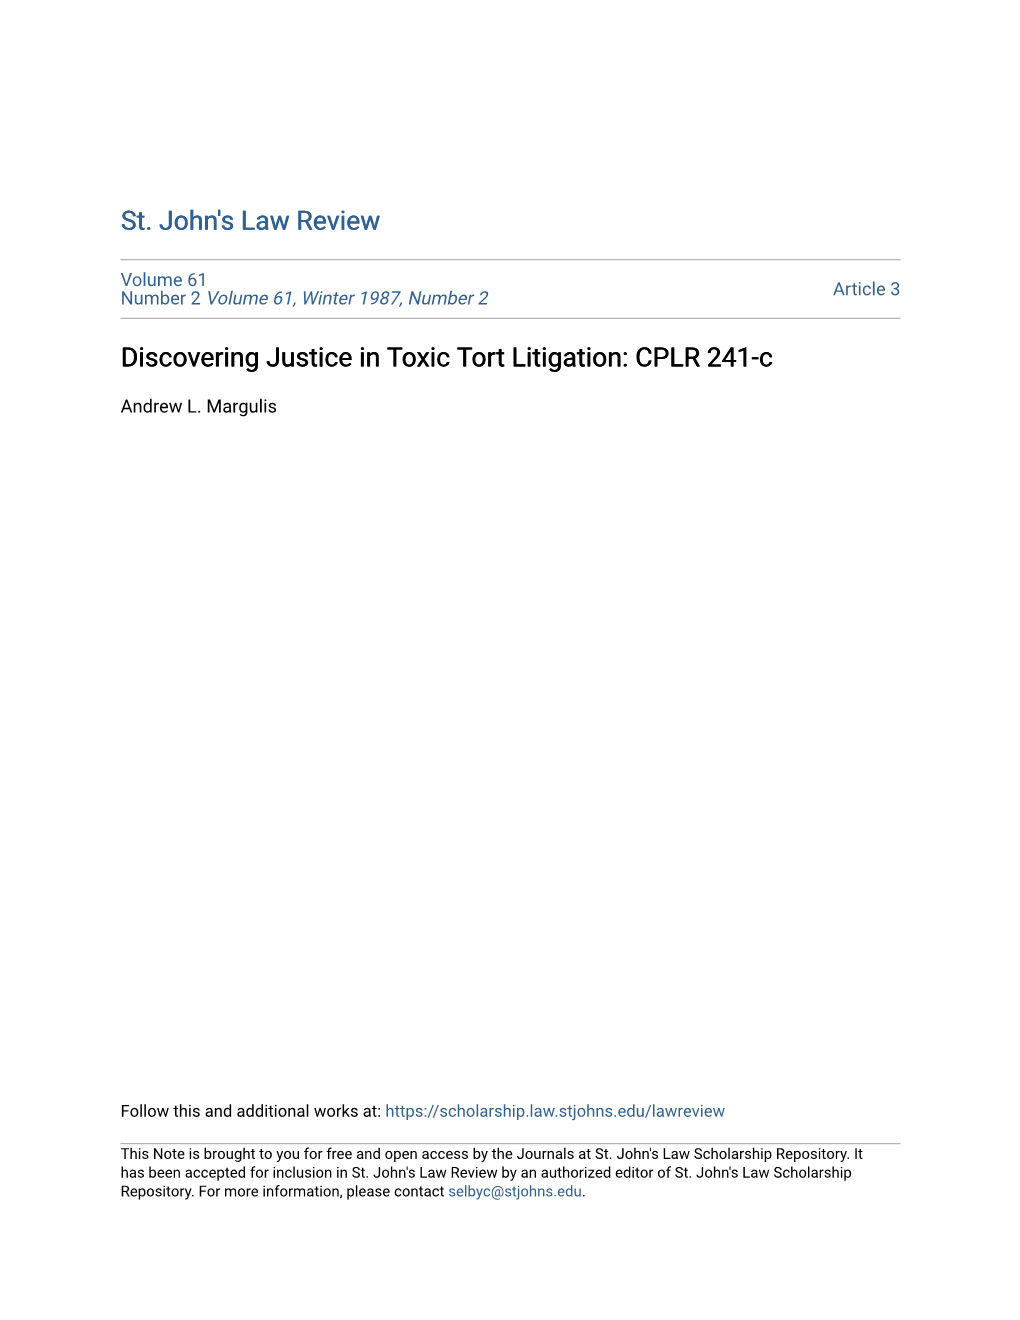 Discovering Justice in Toxic Tort Litigation: CPLR 241-C